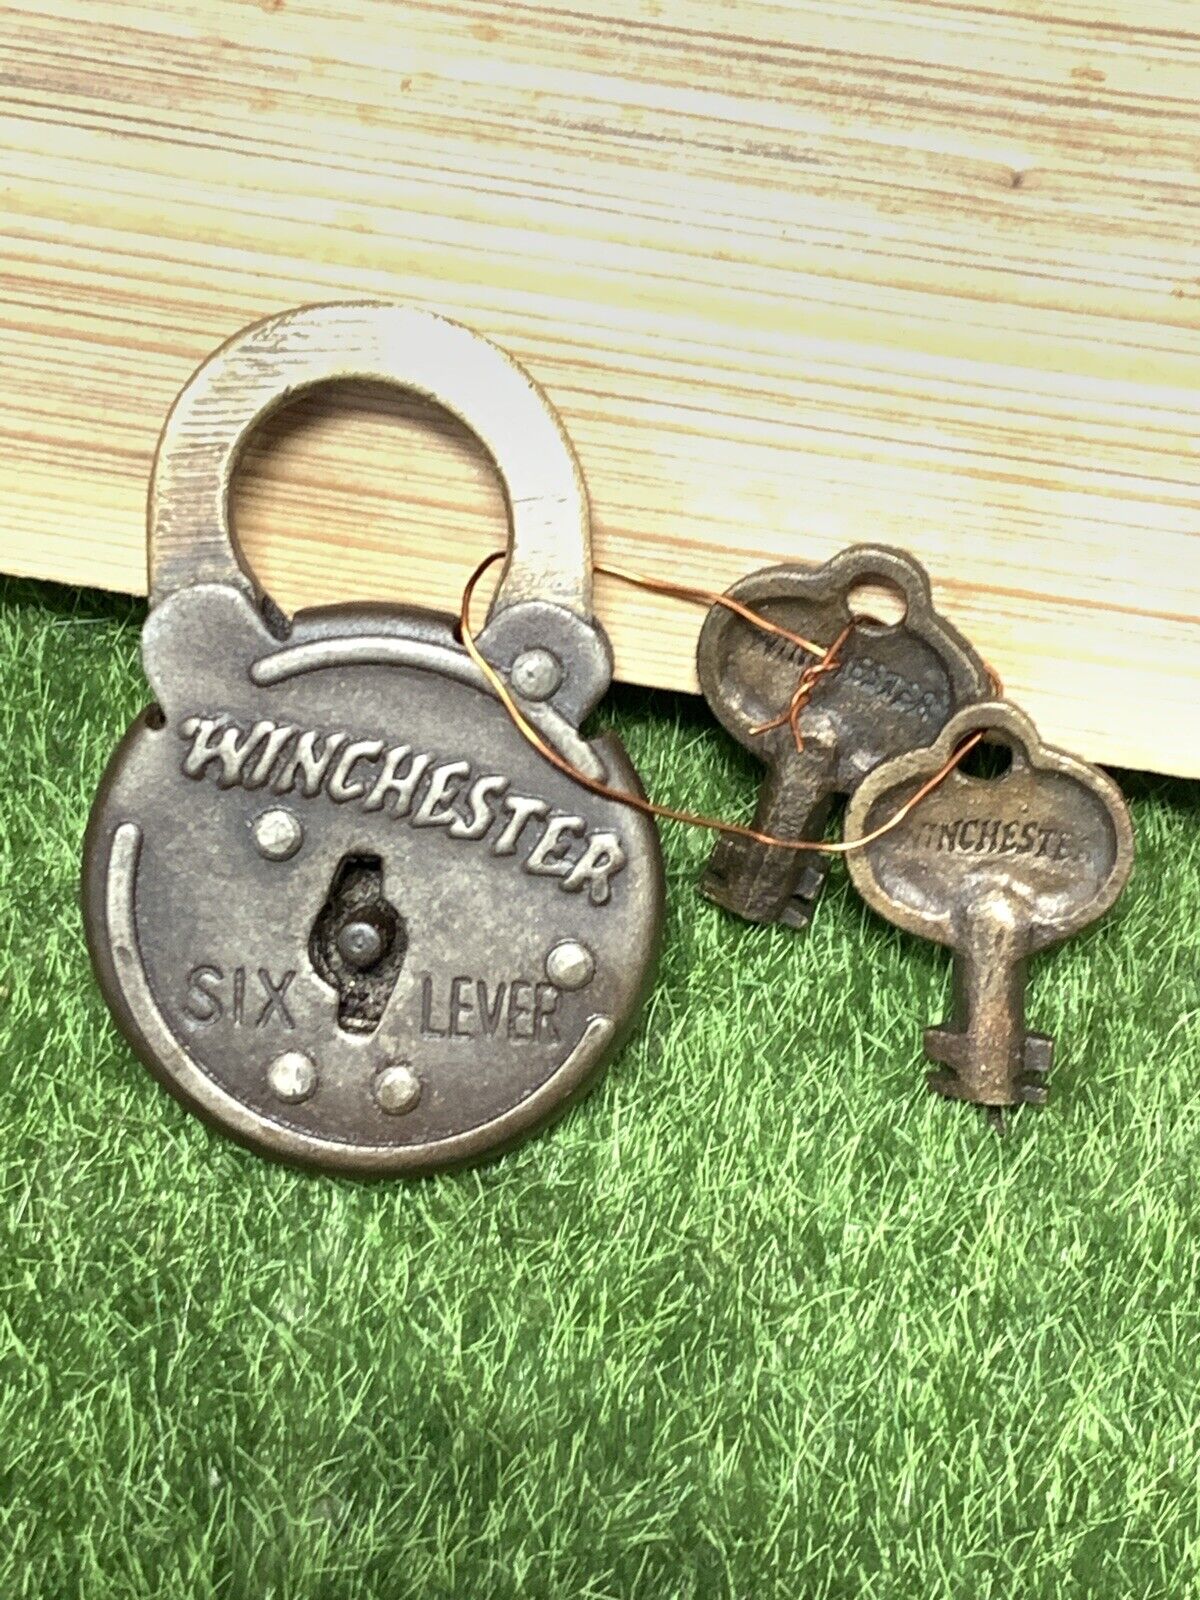 Winchester Repeating Arms Co. 6 Six Lever Padlock Lock & 2 Working Key Old West